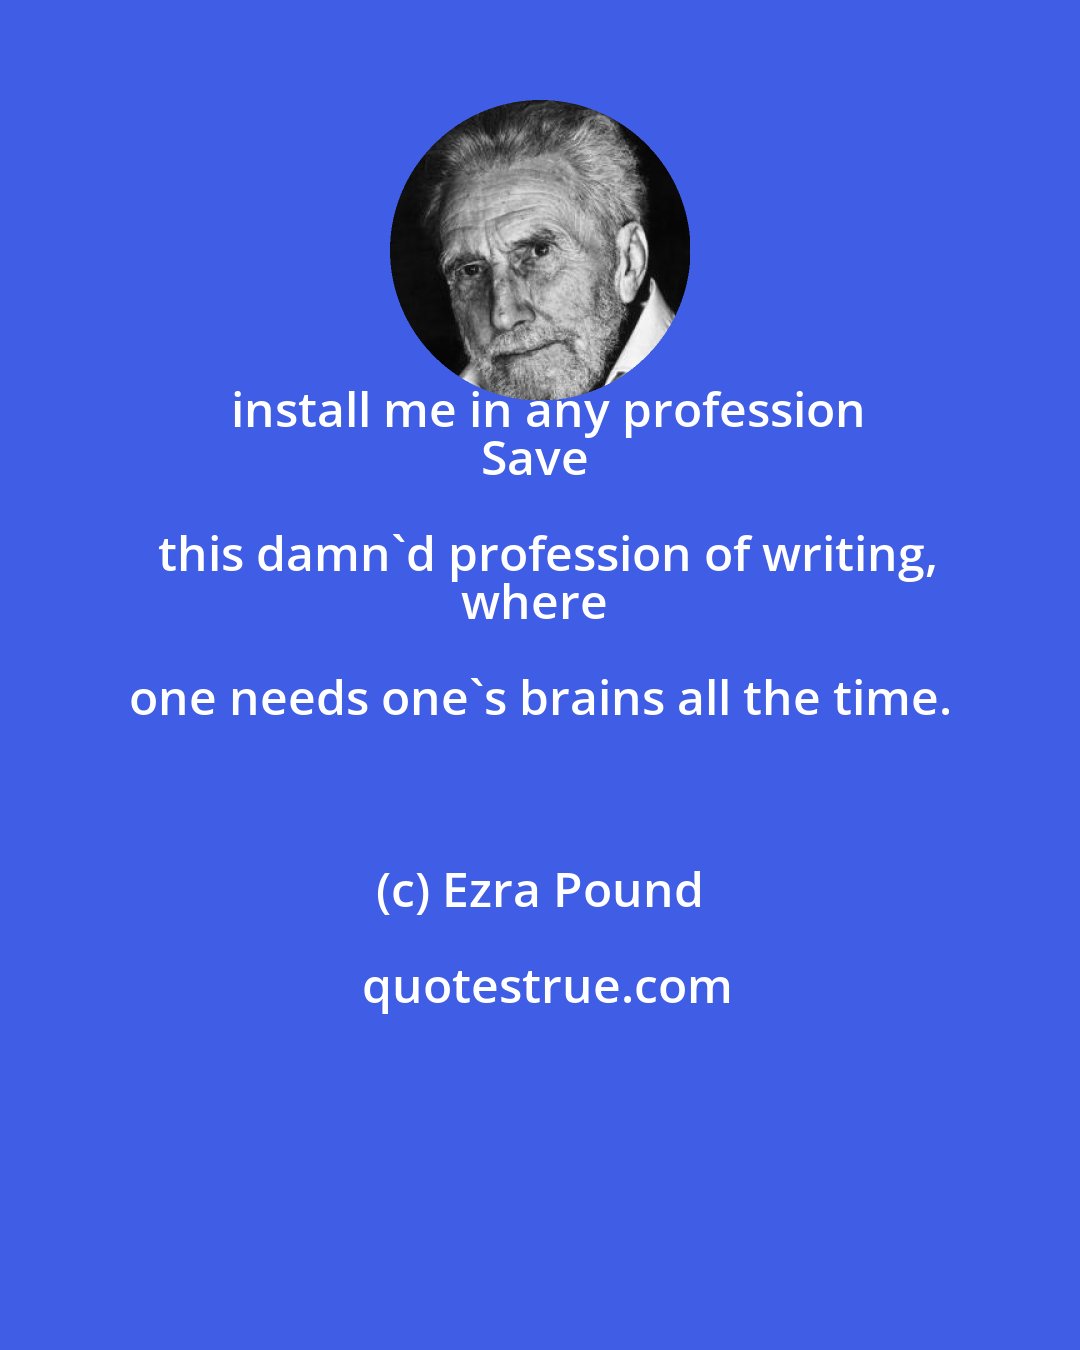 Ezra Pound: install me in any profession
Save this damn'd profession of writing,
where one needs one's brains all the time.